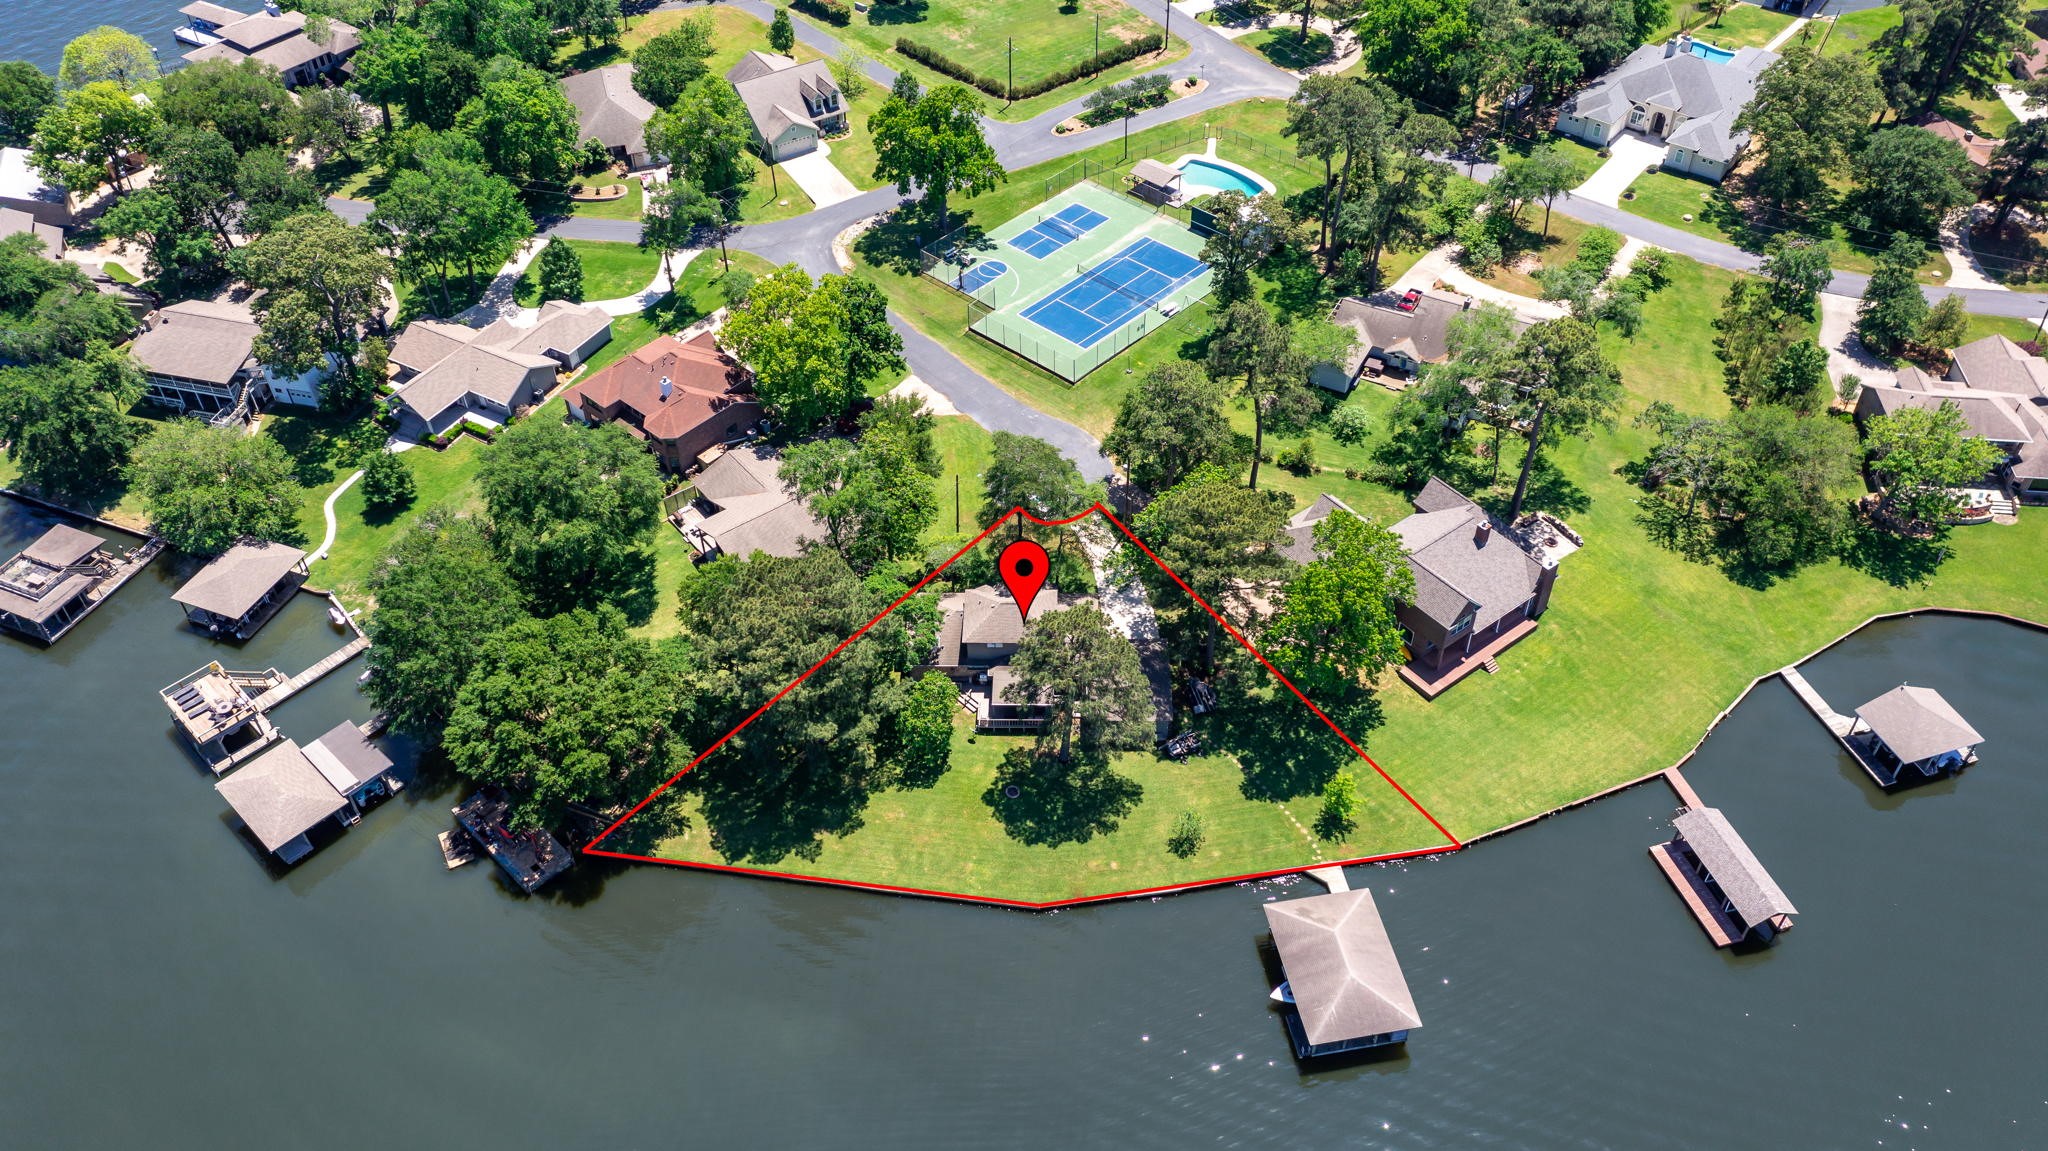 This property has 299 feet of waterfront bulkhead. The lot is over 17000 sq feet.